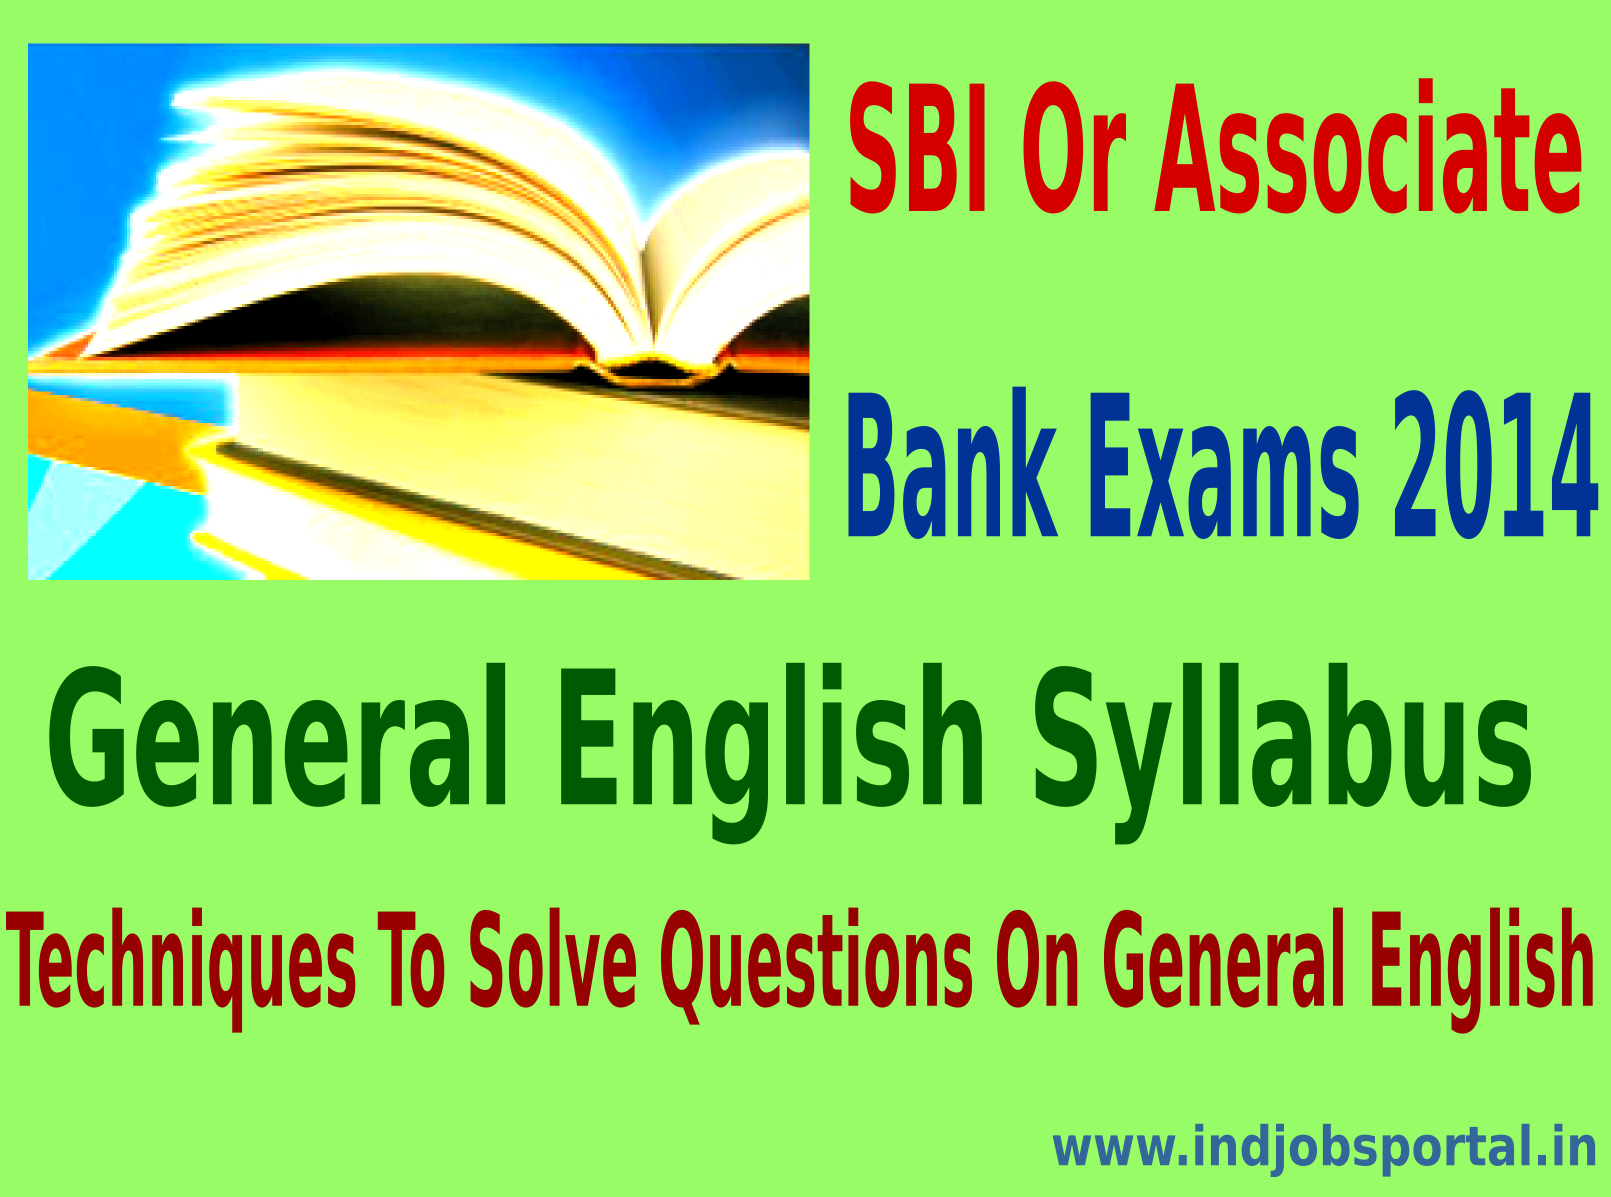 SBI Or Associate Bank Exams 2014: General English Syllabus And Techniques To solve Questions